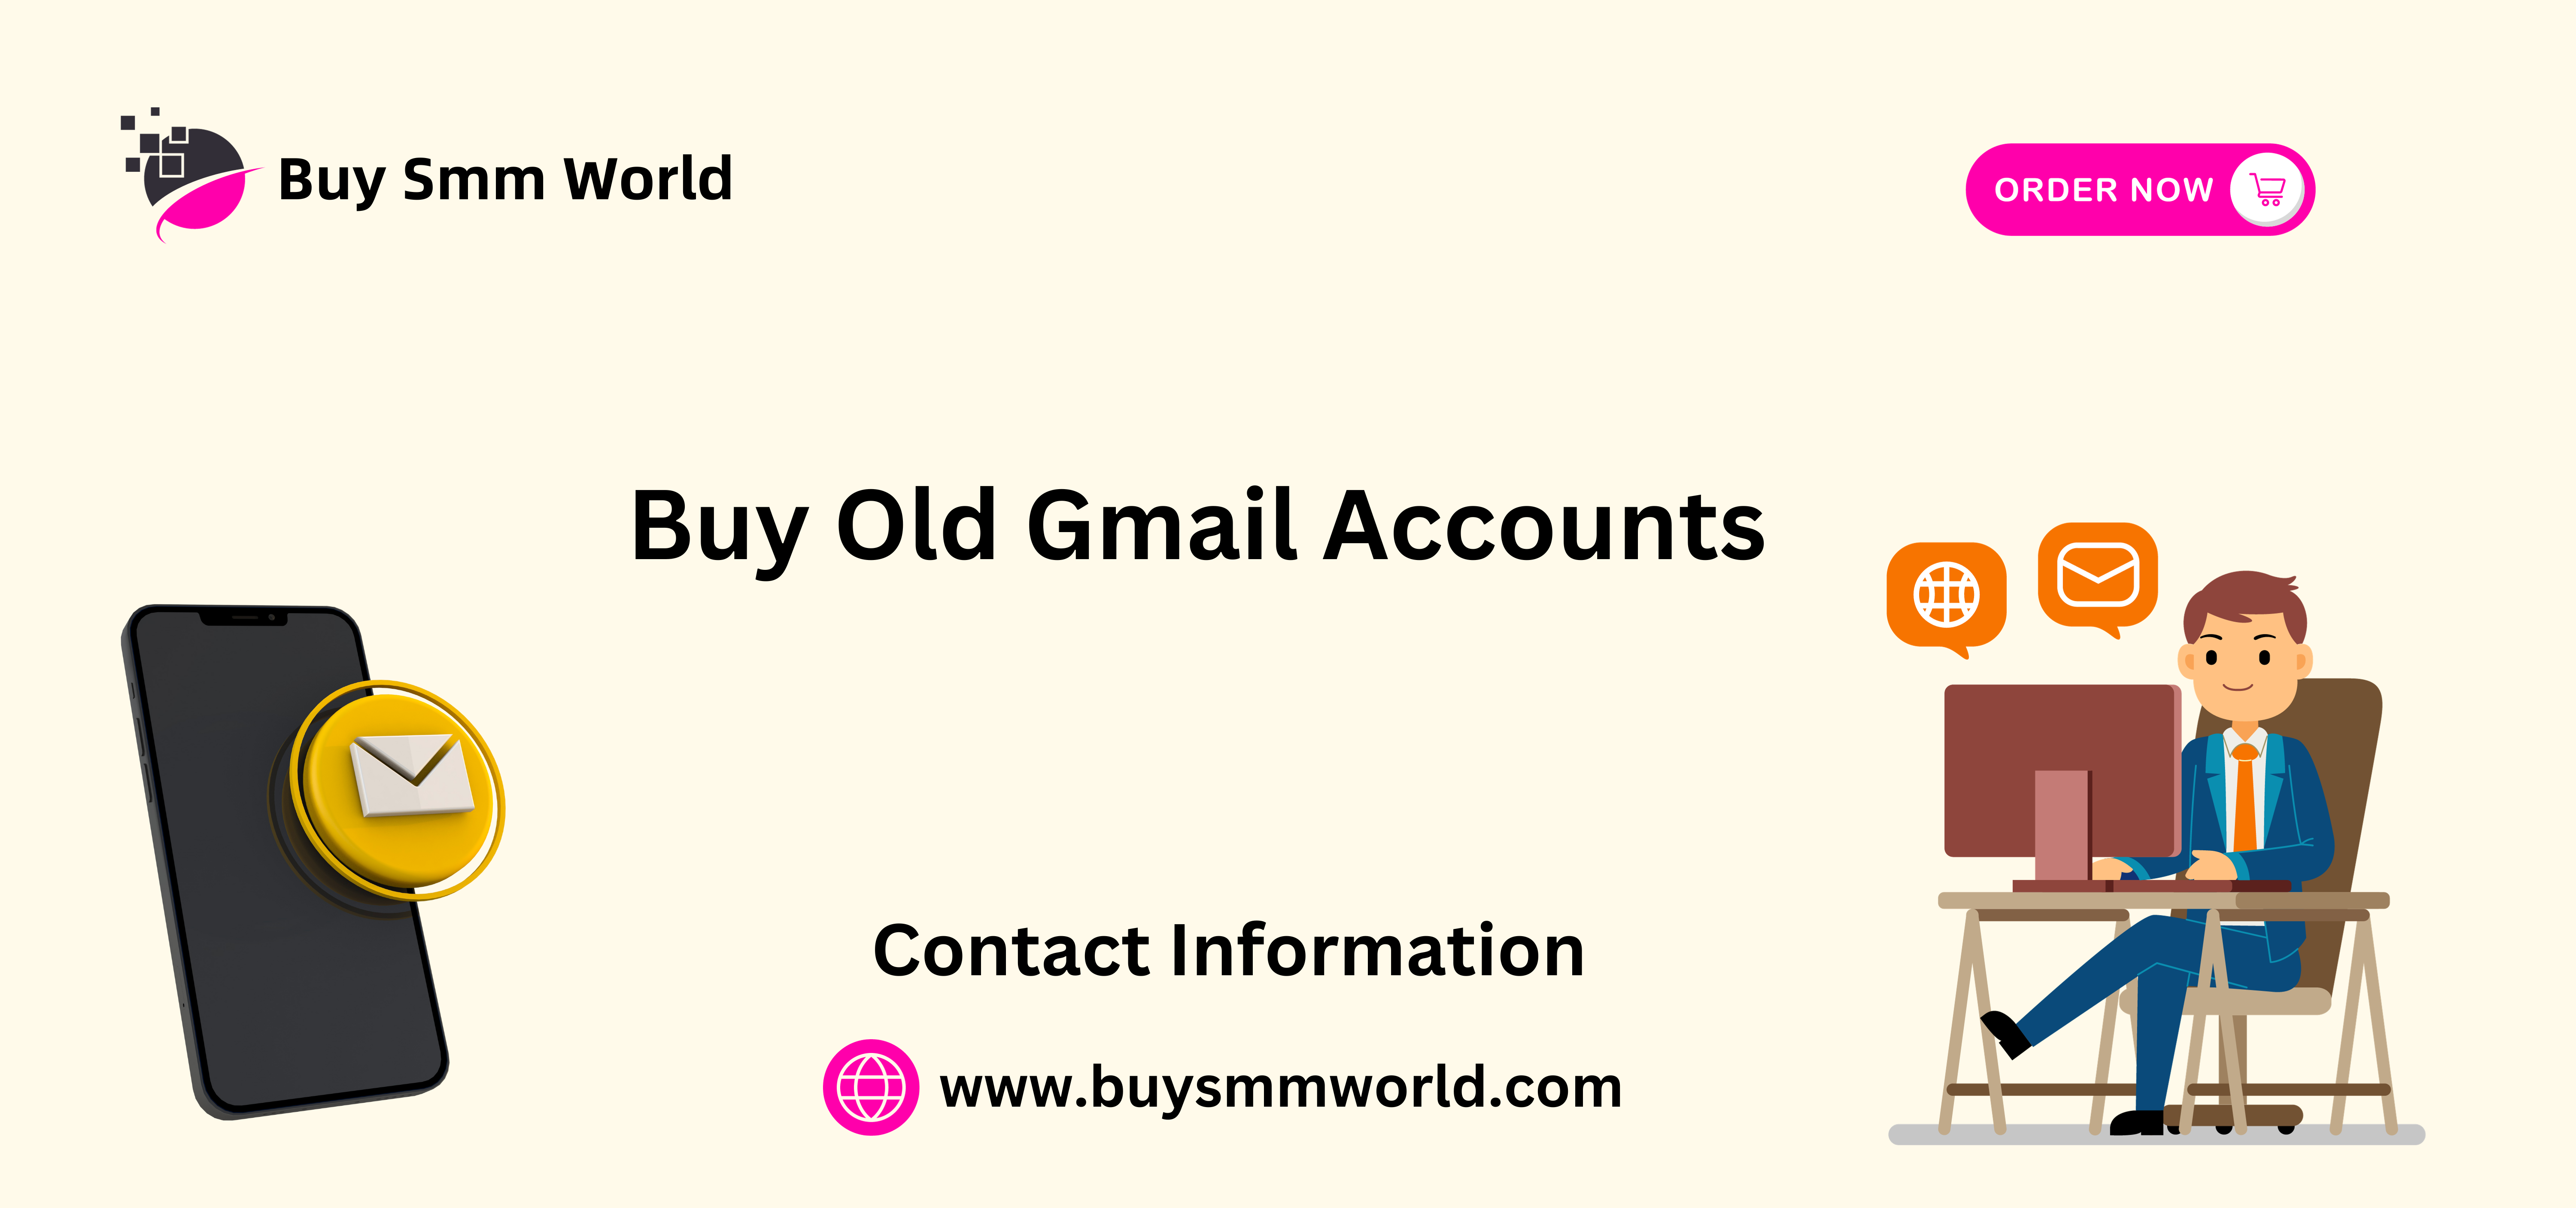 Buy Old Gmail Accounts
